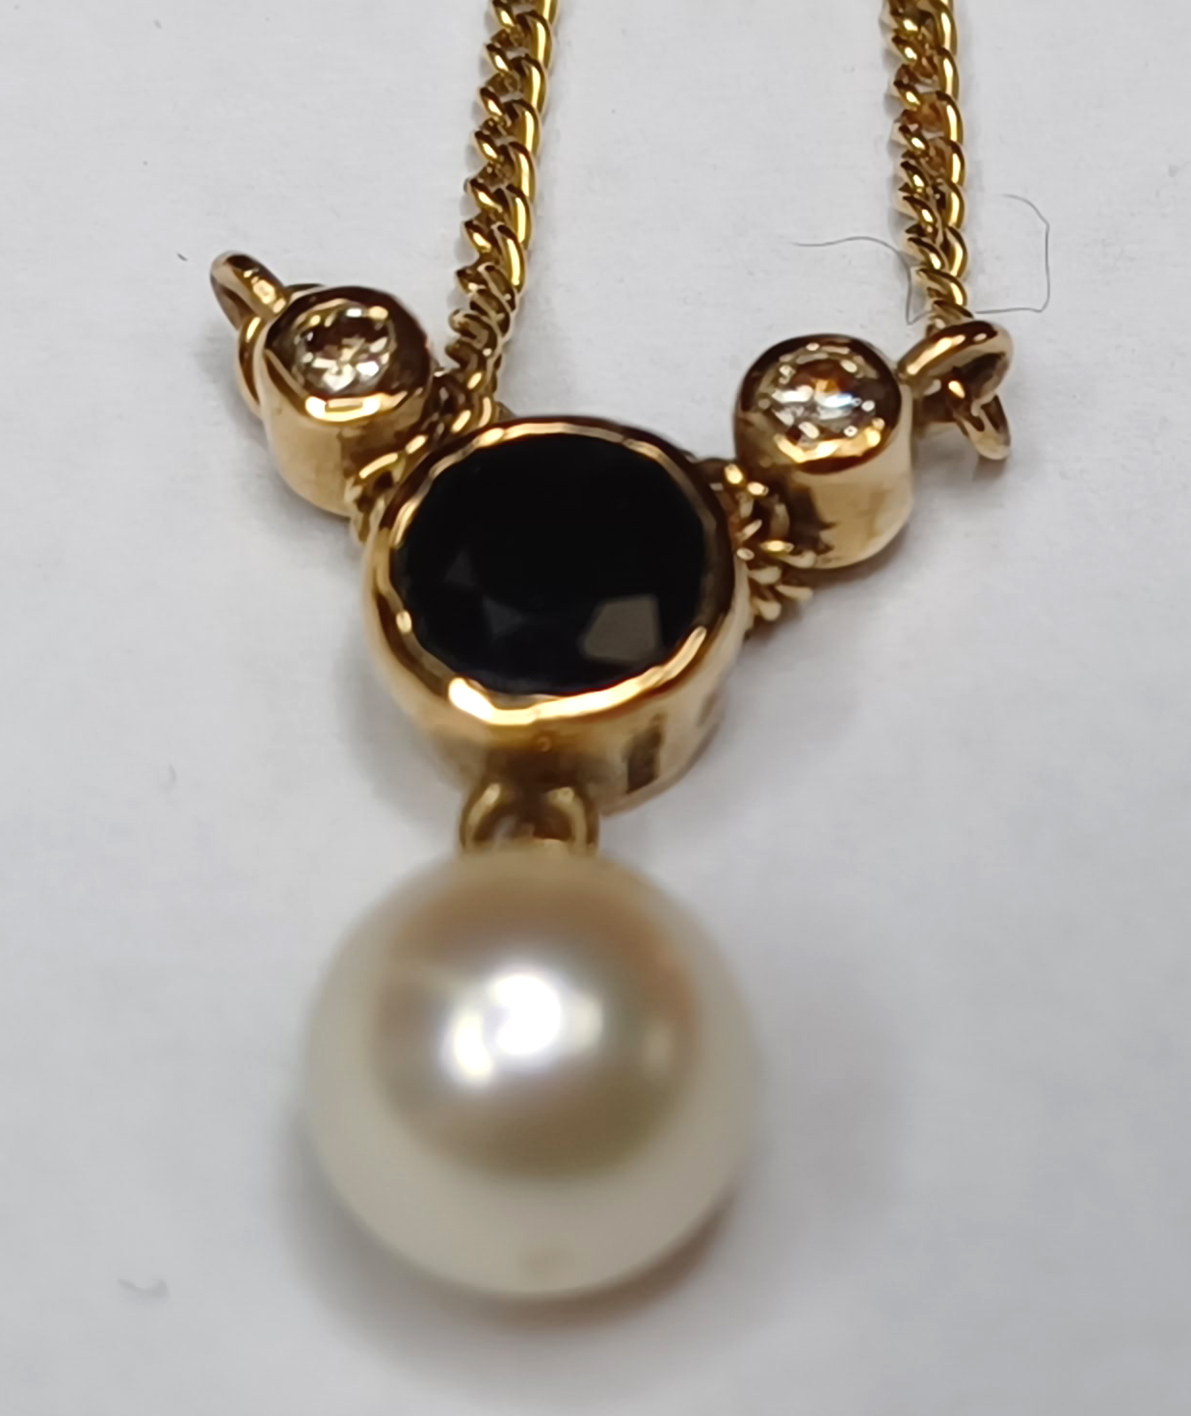 9CT GOLD PEARL AND SAPPHIRE NECKLACE 2.9g 43CM CHAIN - Image 2 of 2